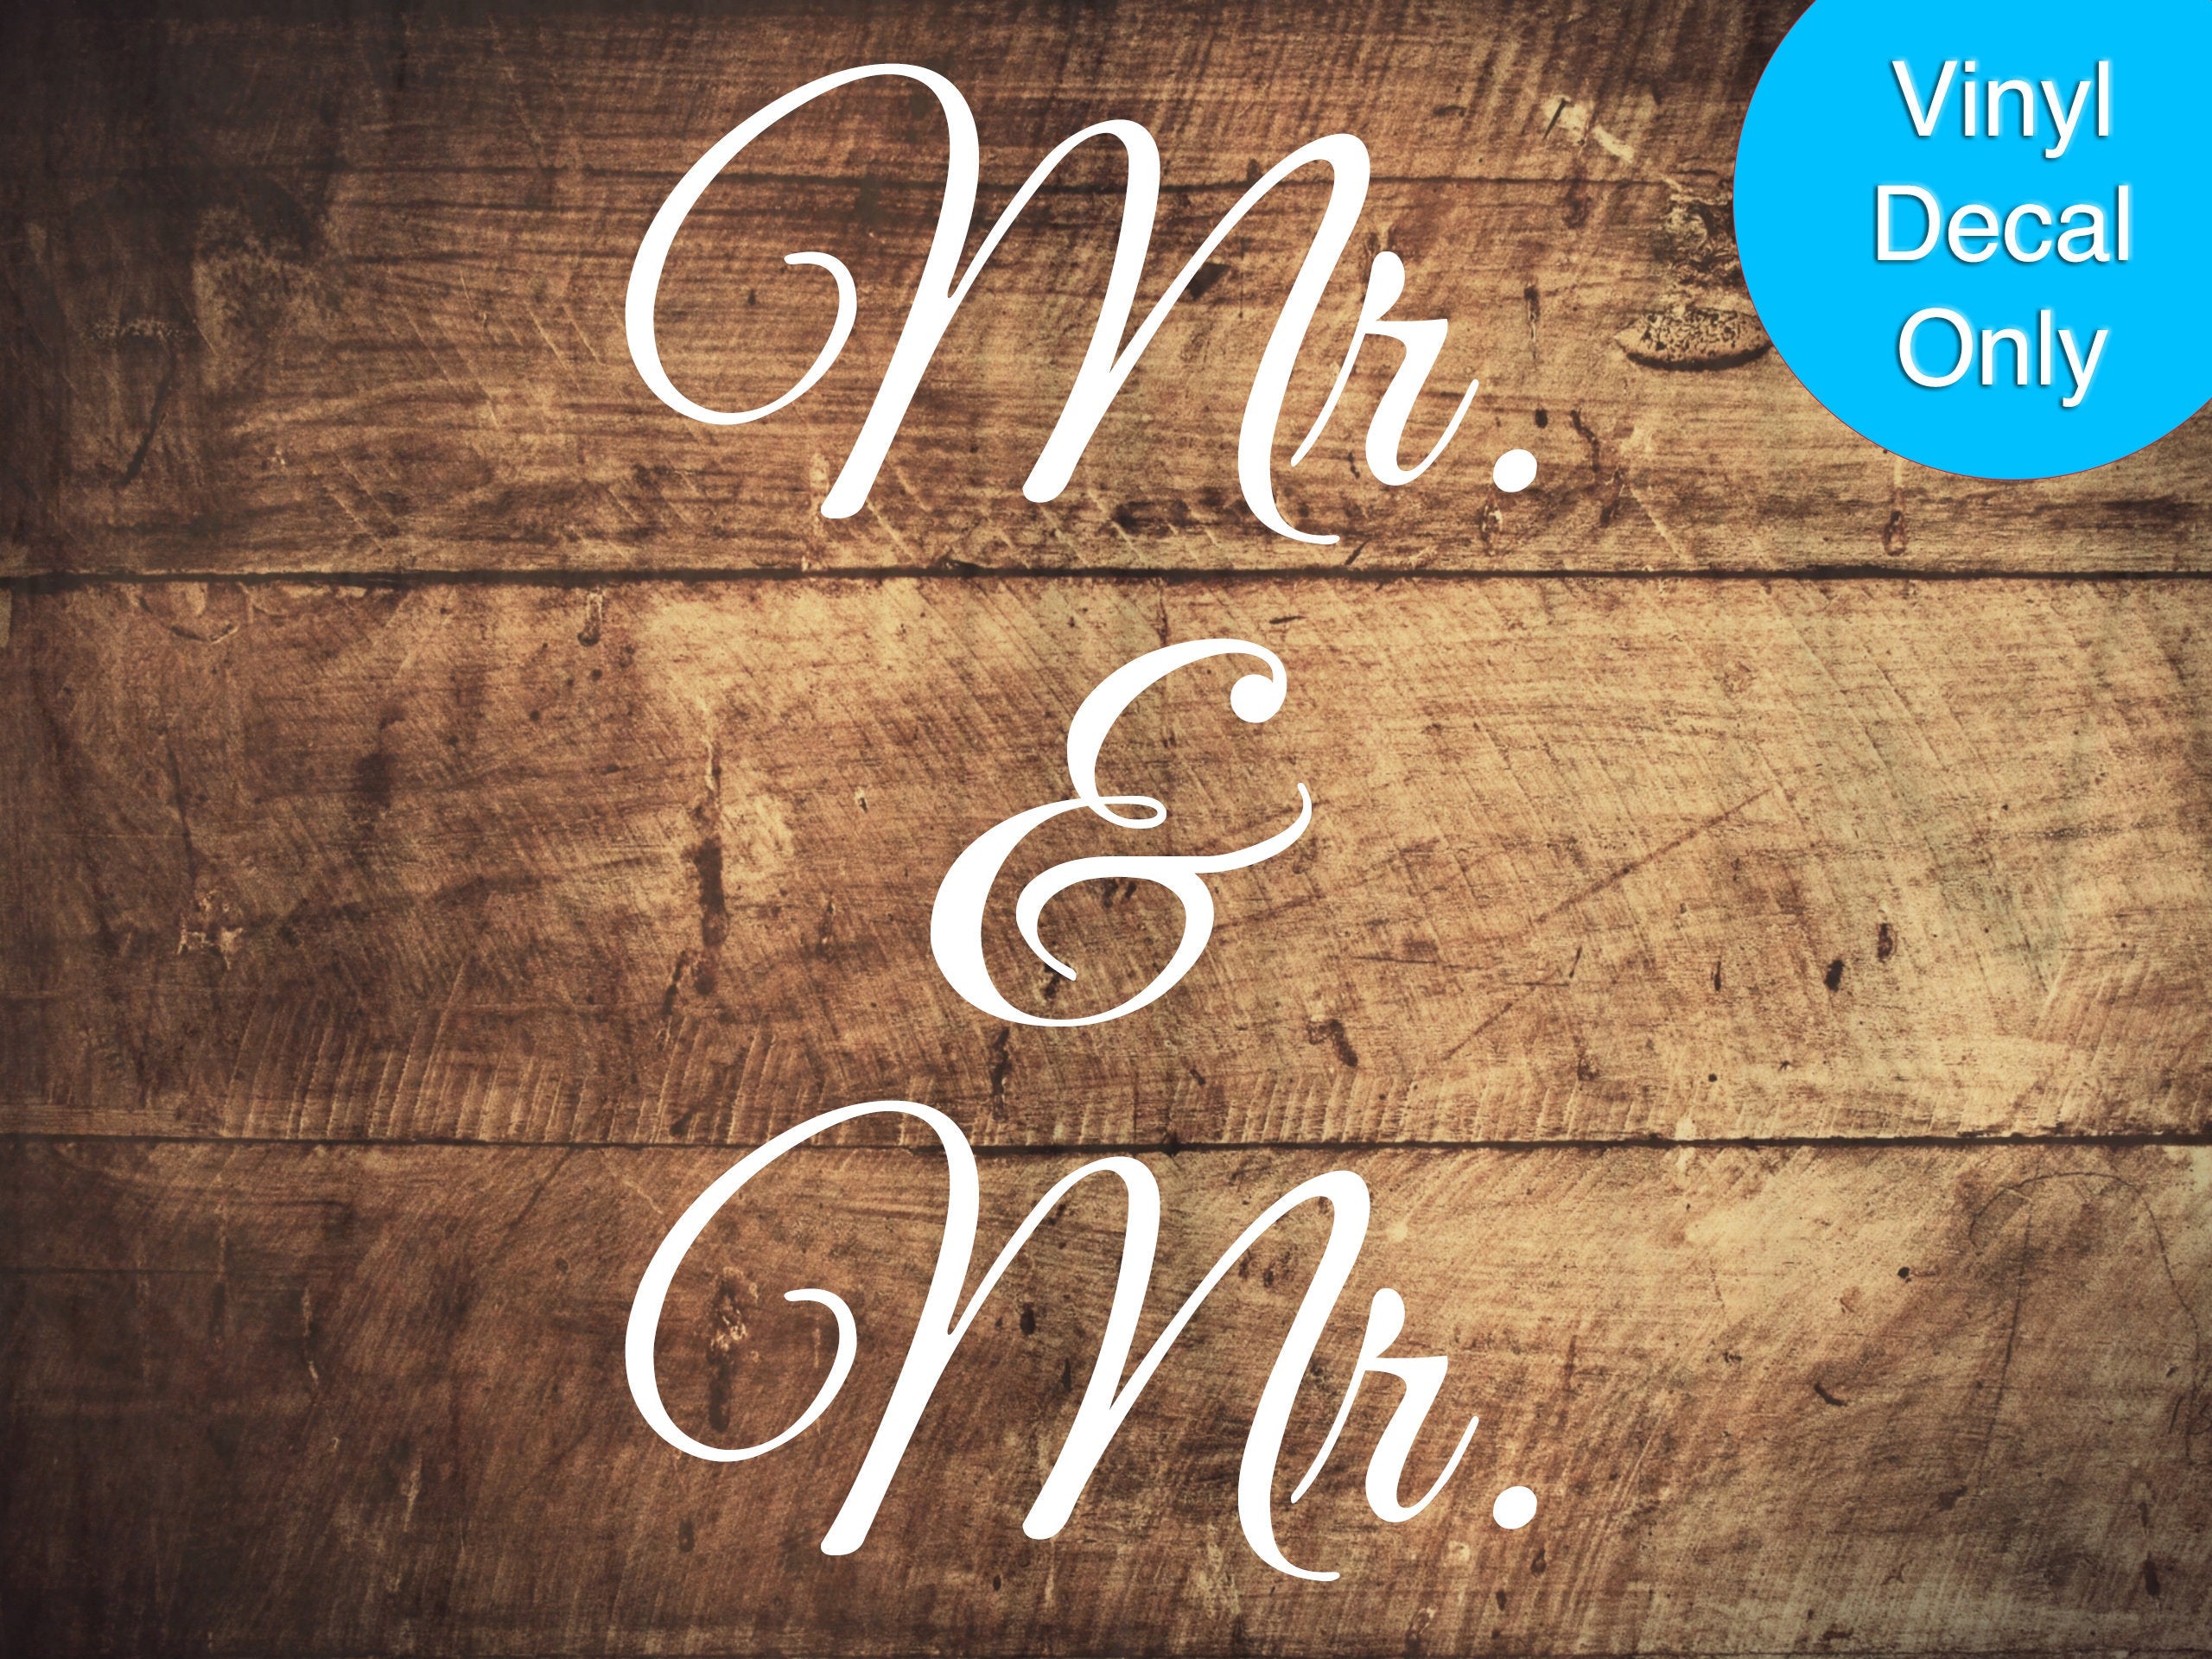 Mr. and Mr. - Groom and Groom Wedding Vinyl Decal for DIY Signs, Ceremony, Reception Decor, Engagement Party, LGBTQ+, Gay Weddings